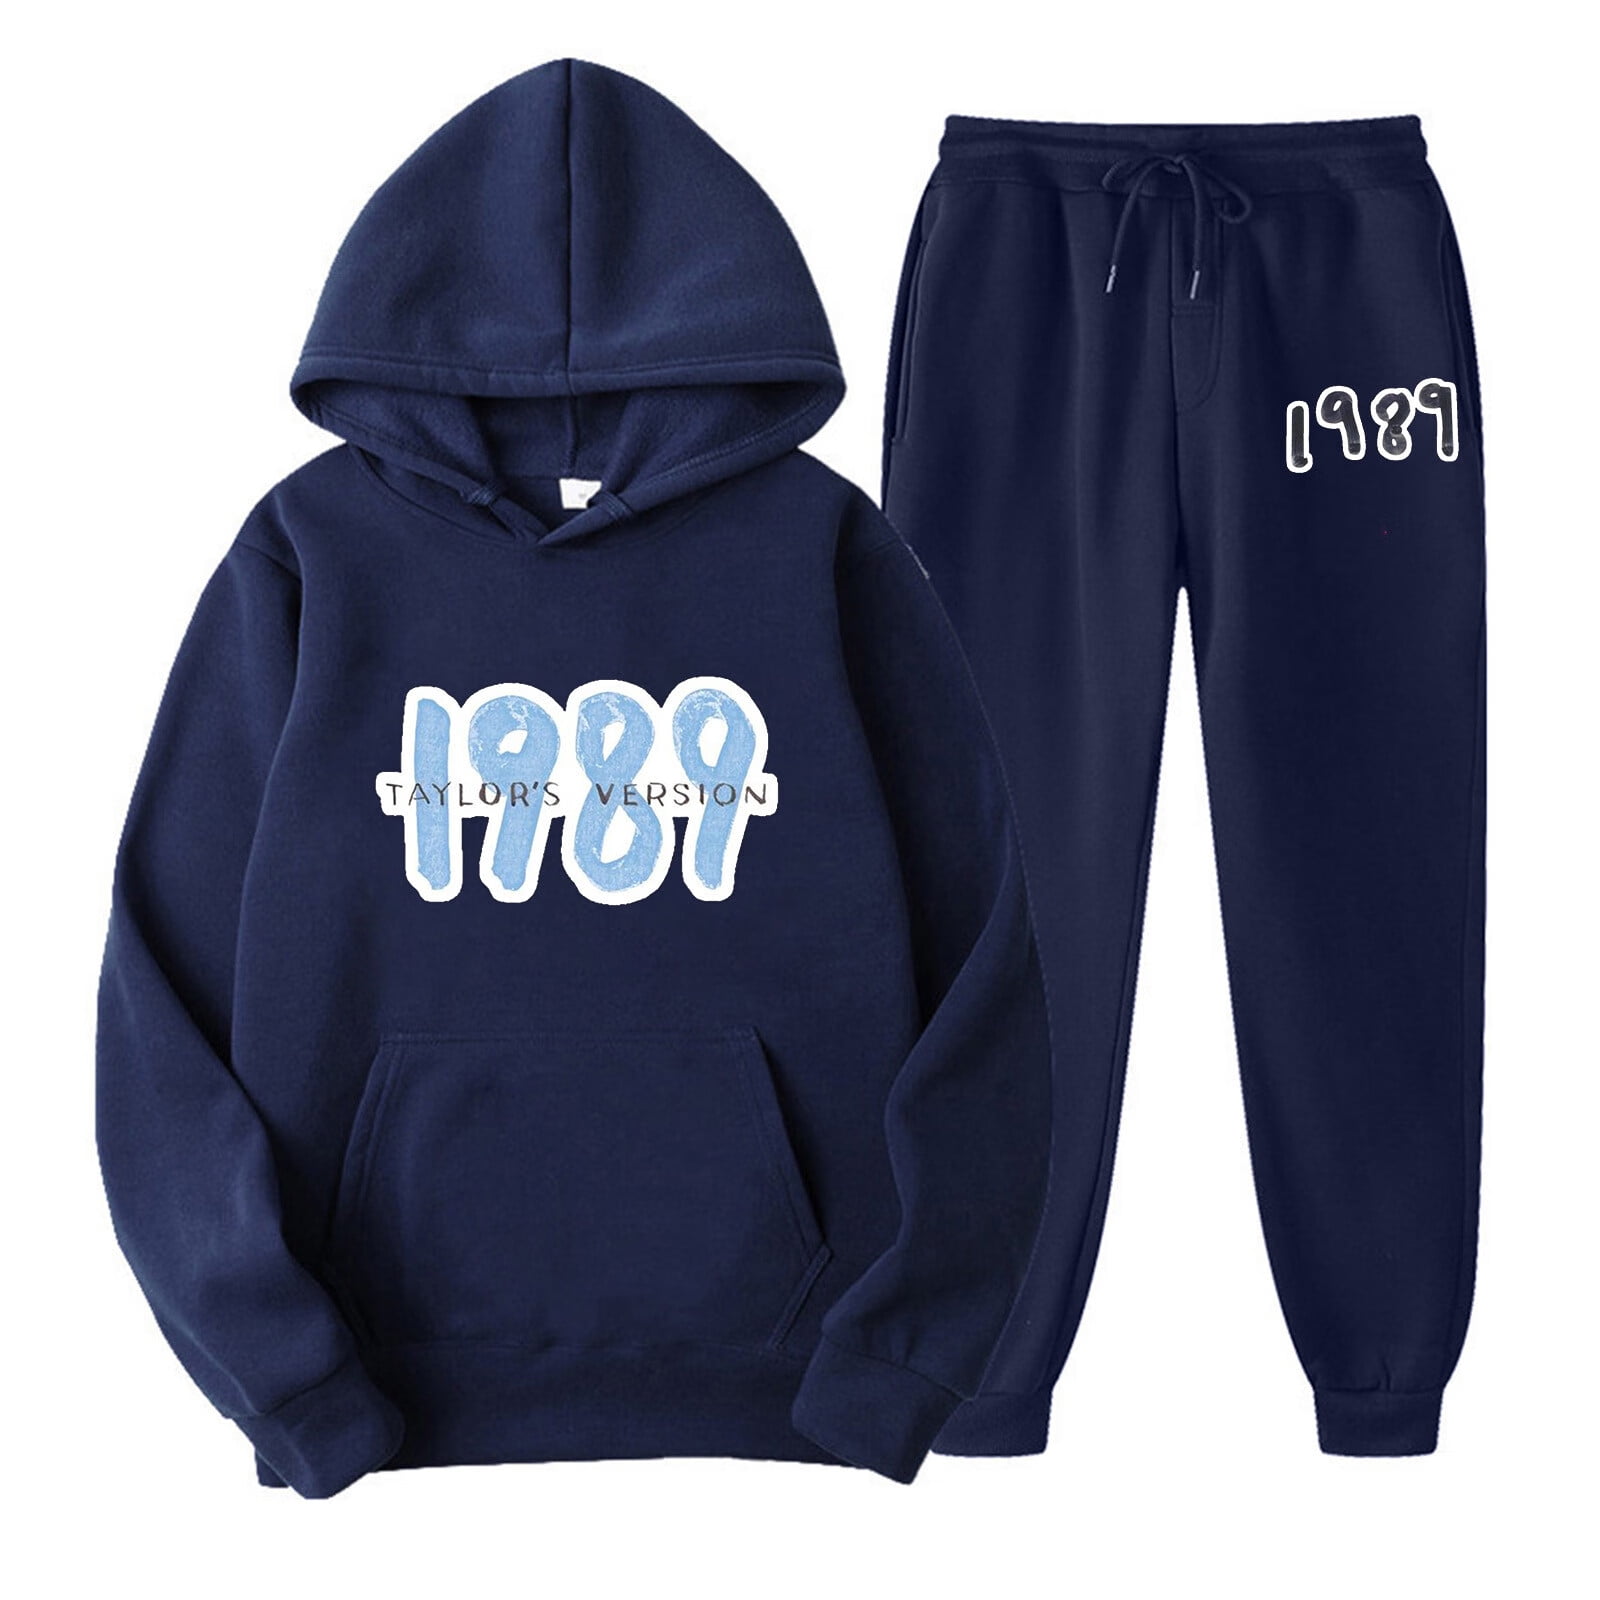 1989 Taylor The Swift Women's Hooded Sports Tracksuit Unisex Two-Piece ...